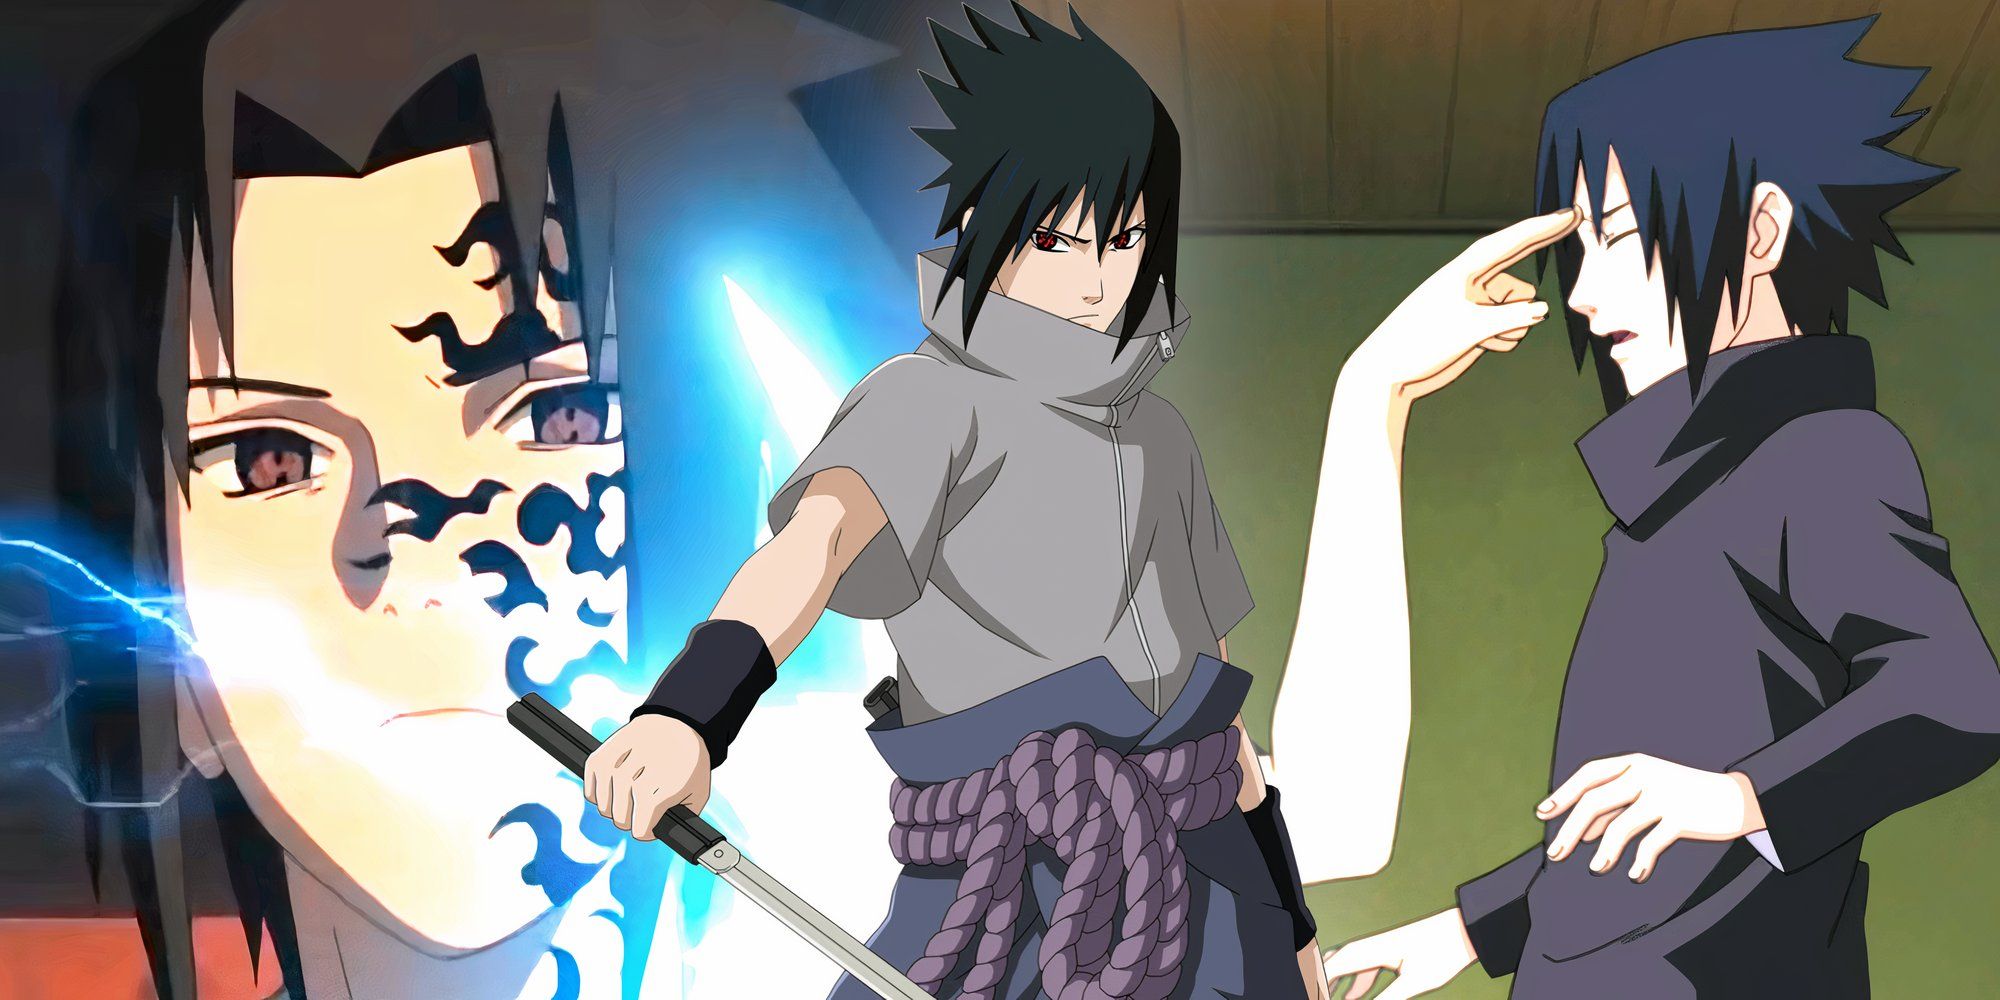 Collage style image featuring different scenes from the Naruto anime of Sasuke in a variety of fight scenes.